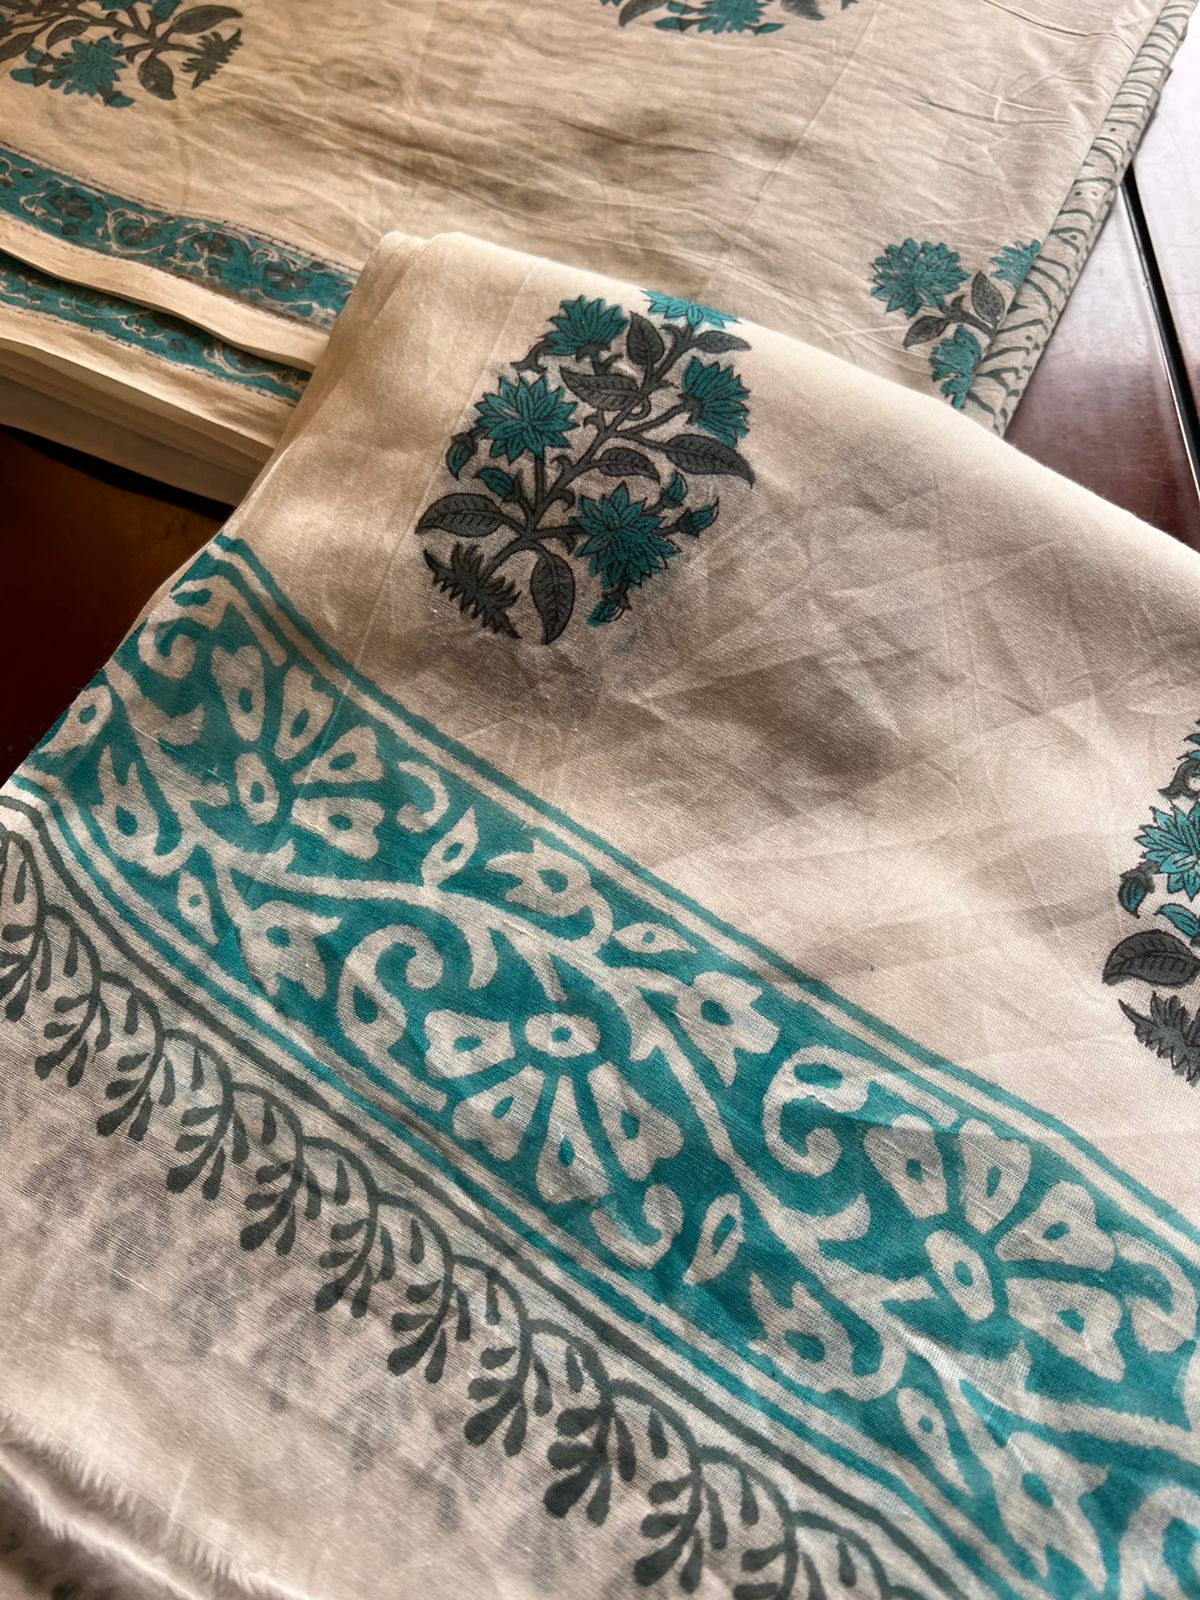 Southloom Green Hand Block Printed Soft Cotton Jaipur Salwar Suit Material in White Base Colour